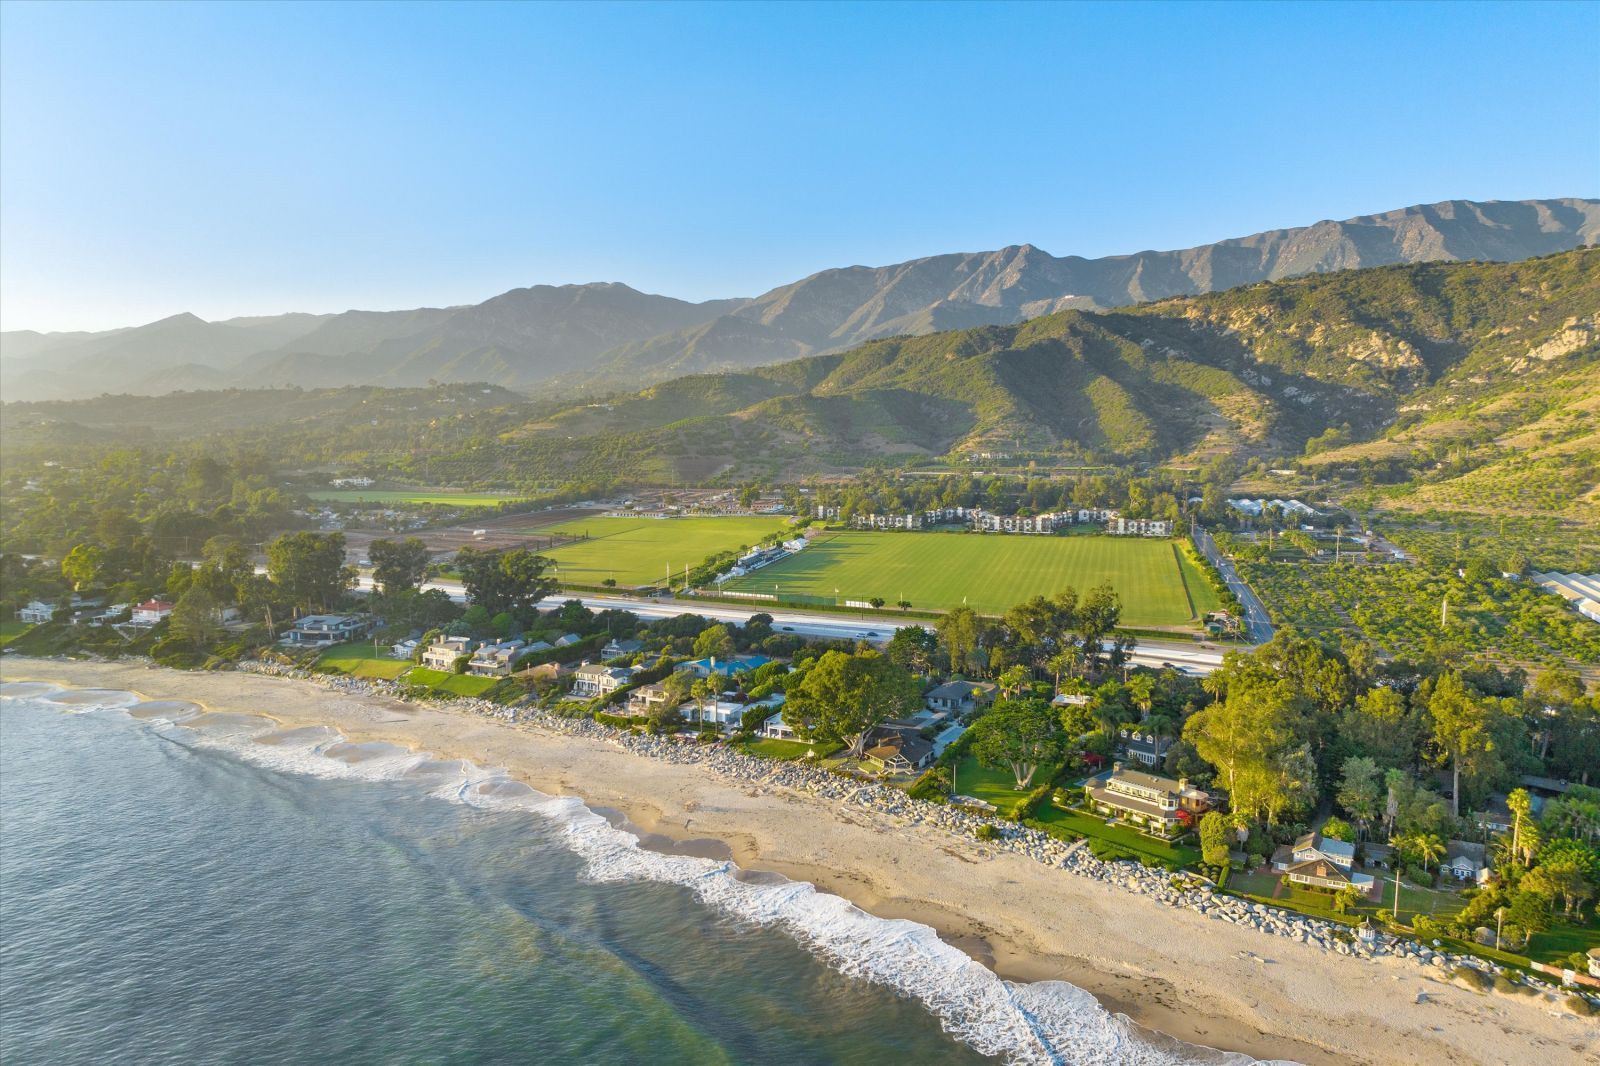 A drone shot of the Carpinteria coastline, with blue ocean, white surf, and sandy beach, along with homes, the Santa barbara Polo Club, and mountains in the background.